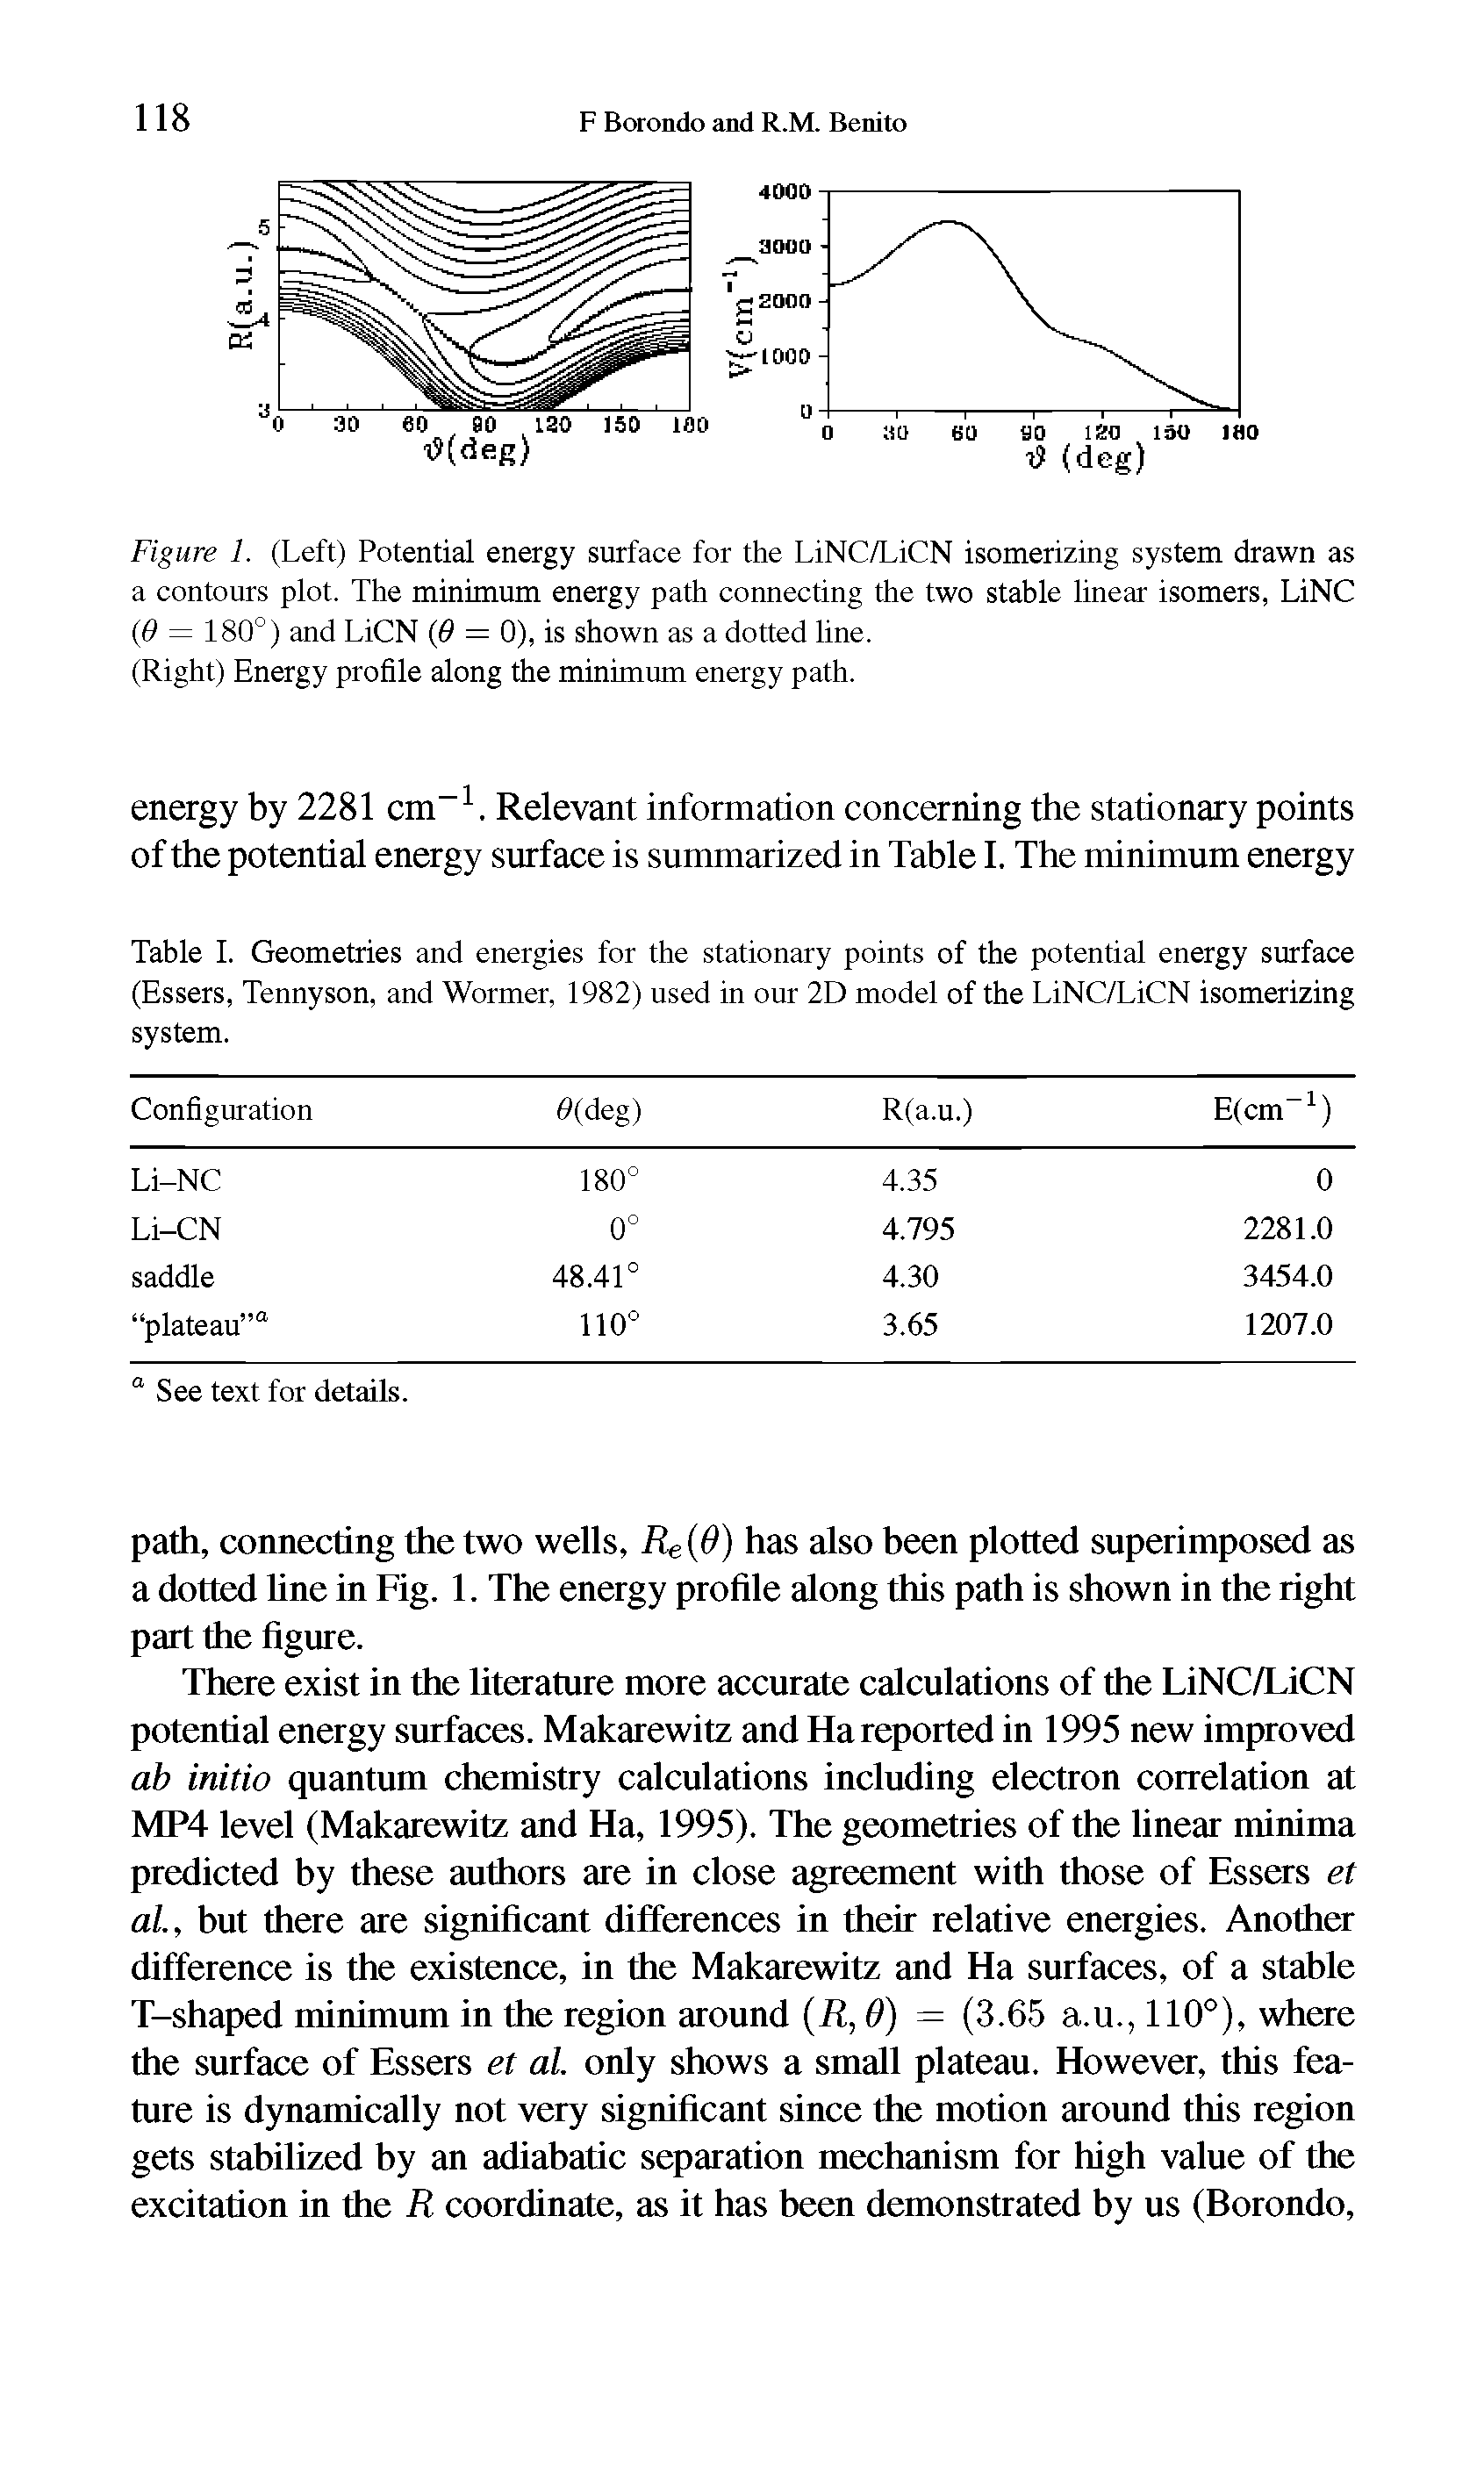 Table I. Geometries and energies for the stationary points of the potential energy surface (Essers, Tennyson, and Wormer, 1982) used in our 2D model of the LiNC/LiCN isomerizing system.